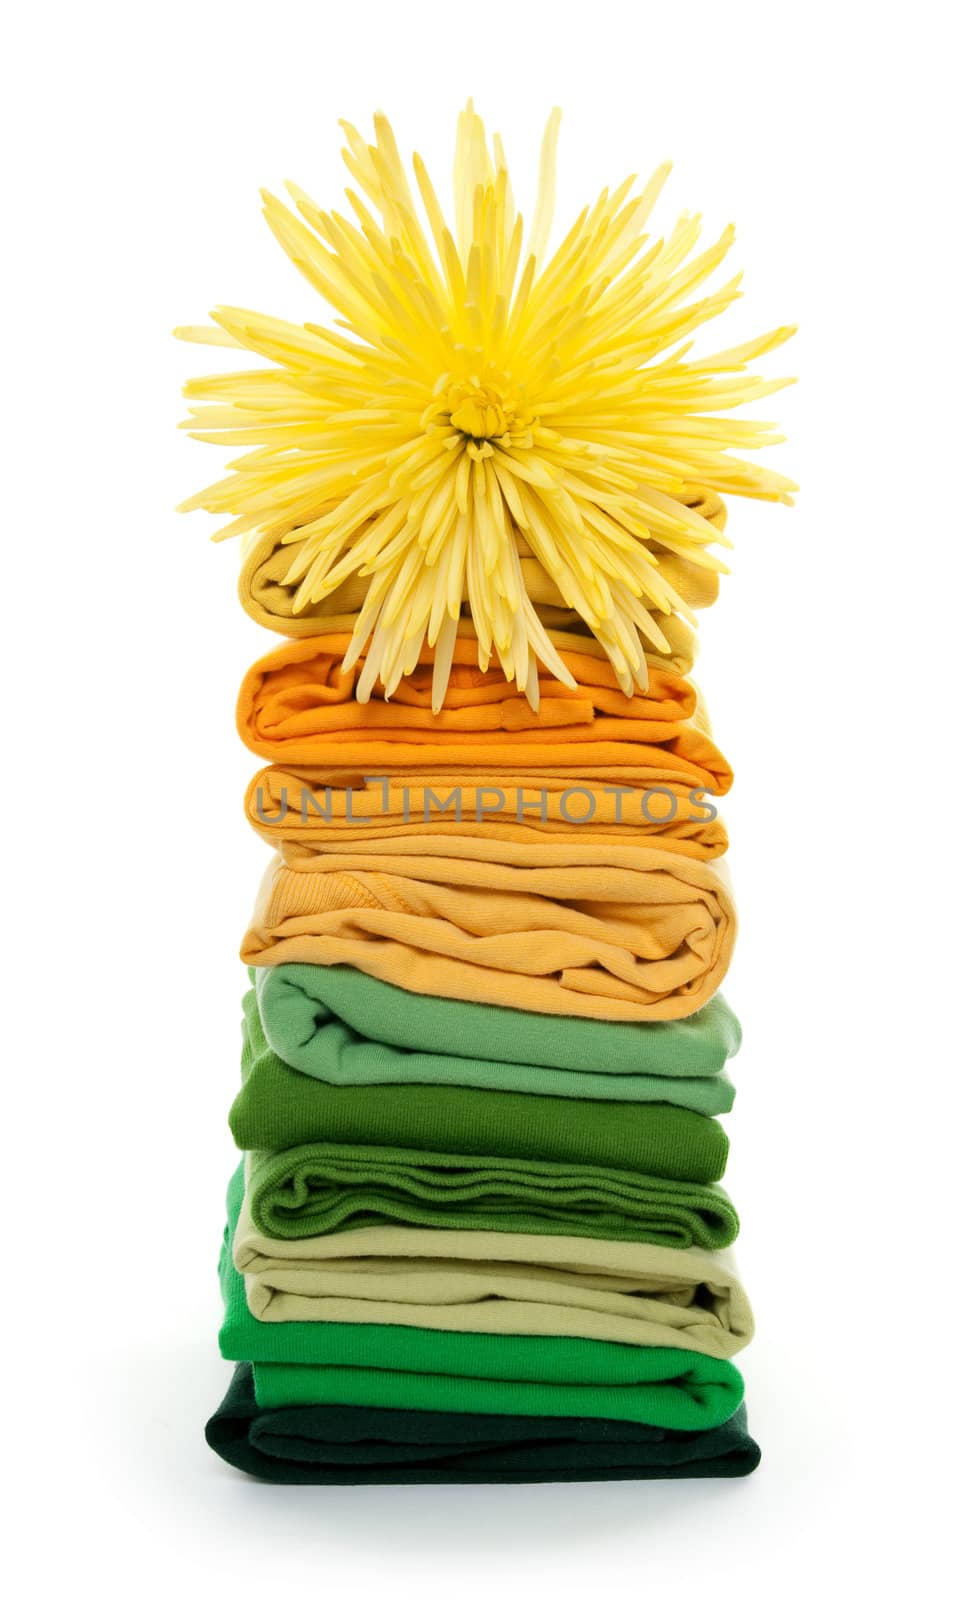 Joyful spring laundry. Flower on top of green and yellow folded clothes.